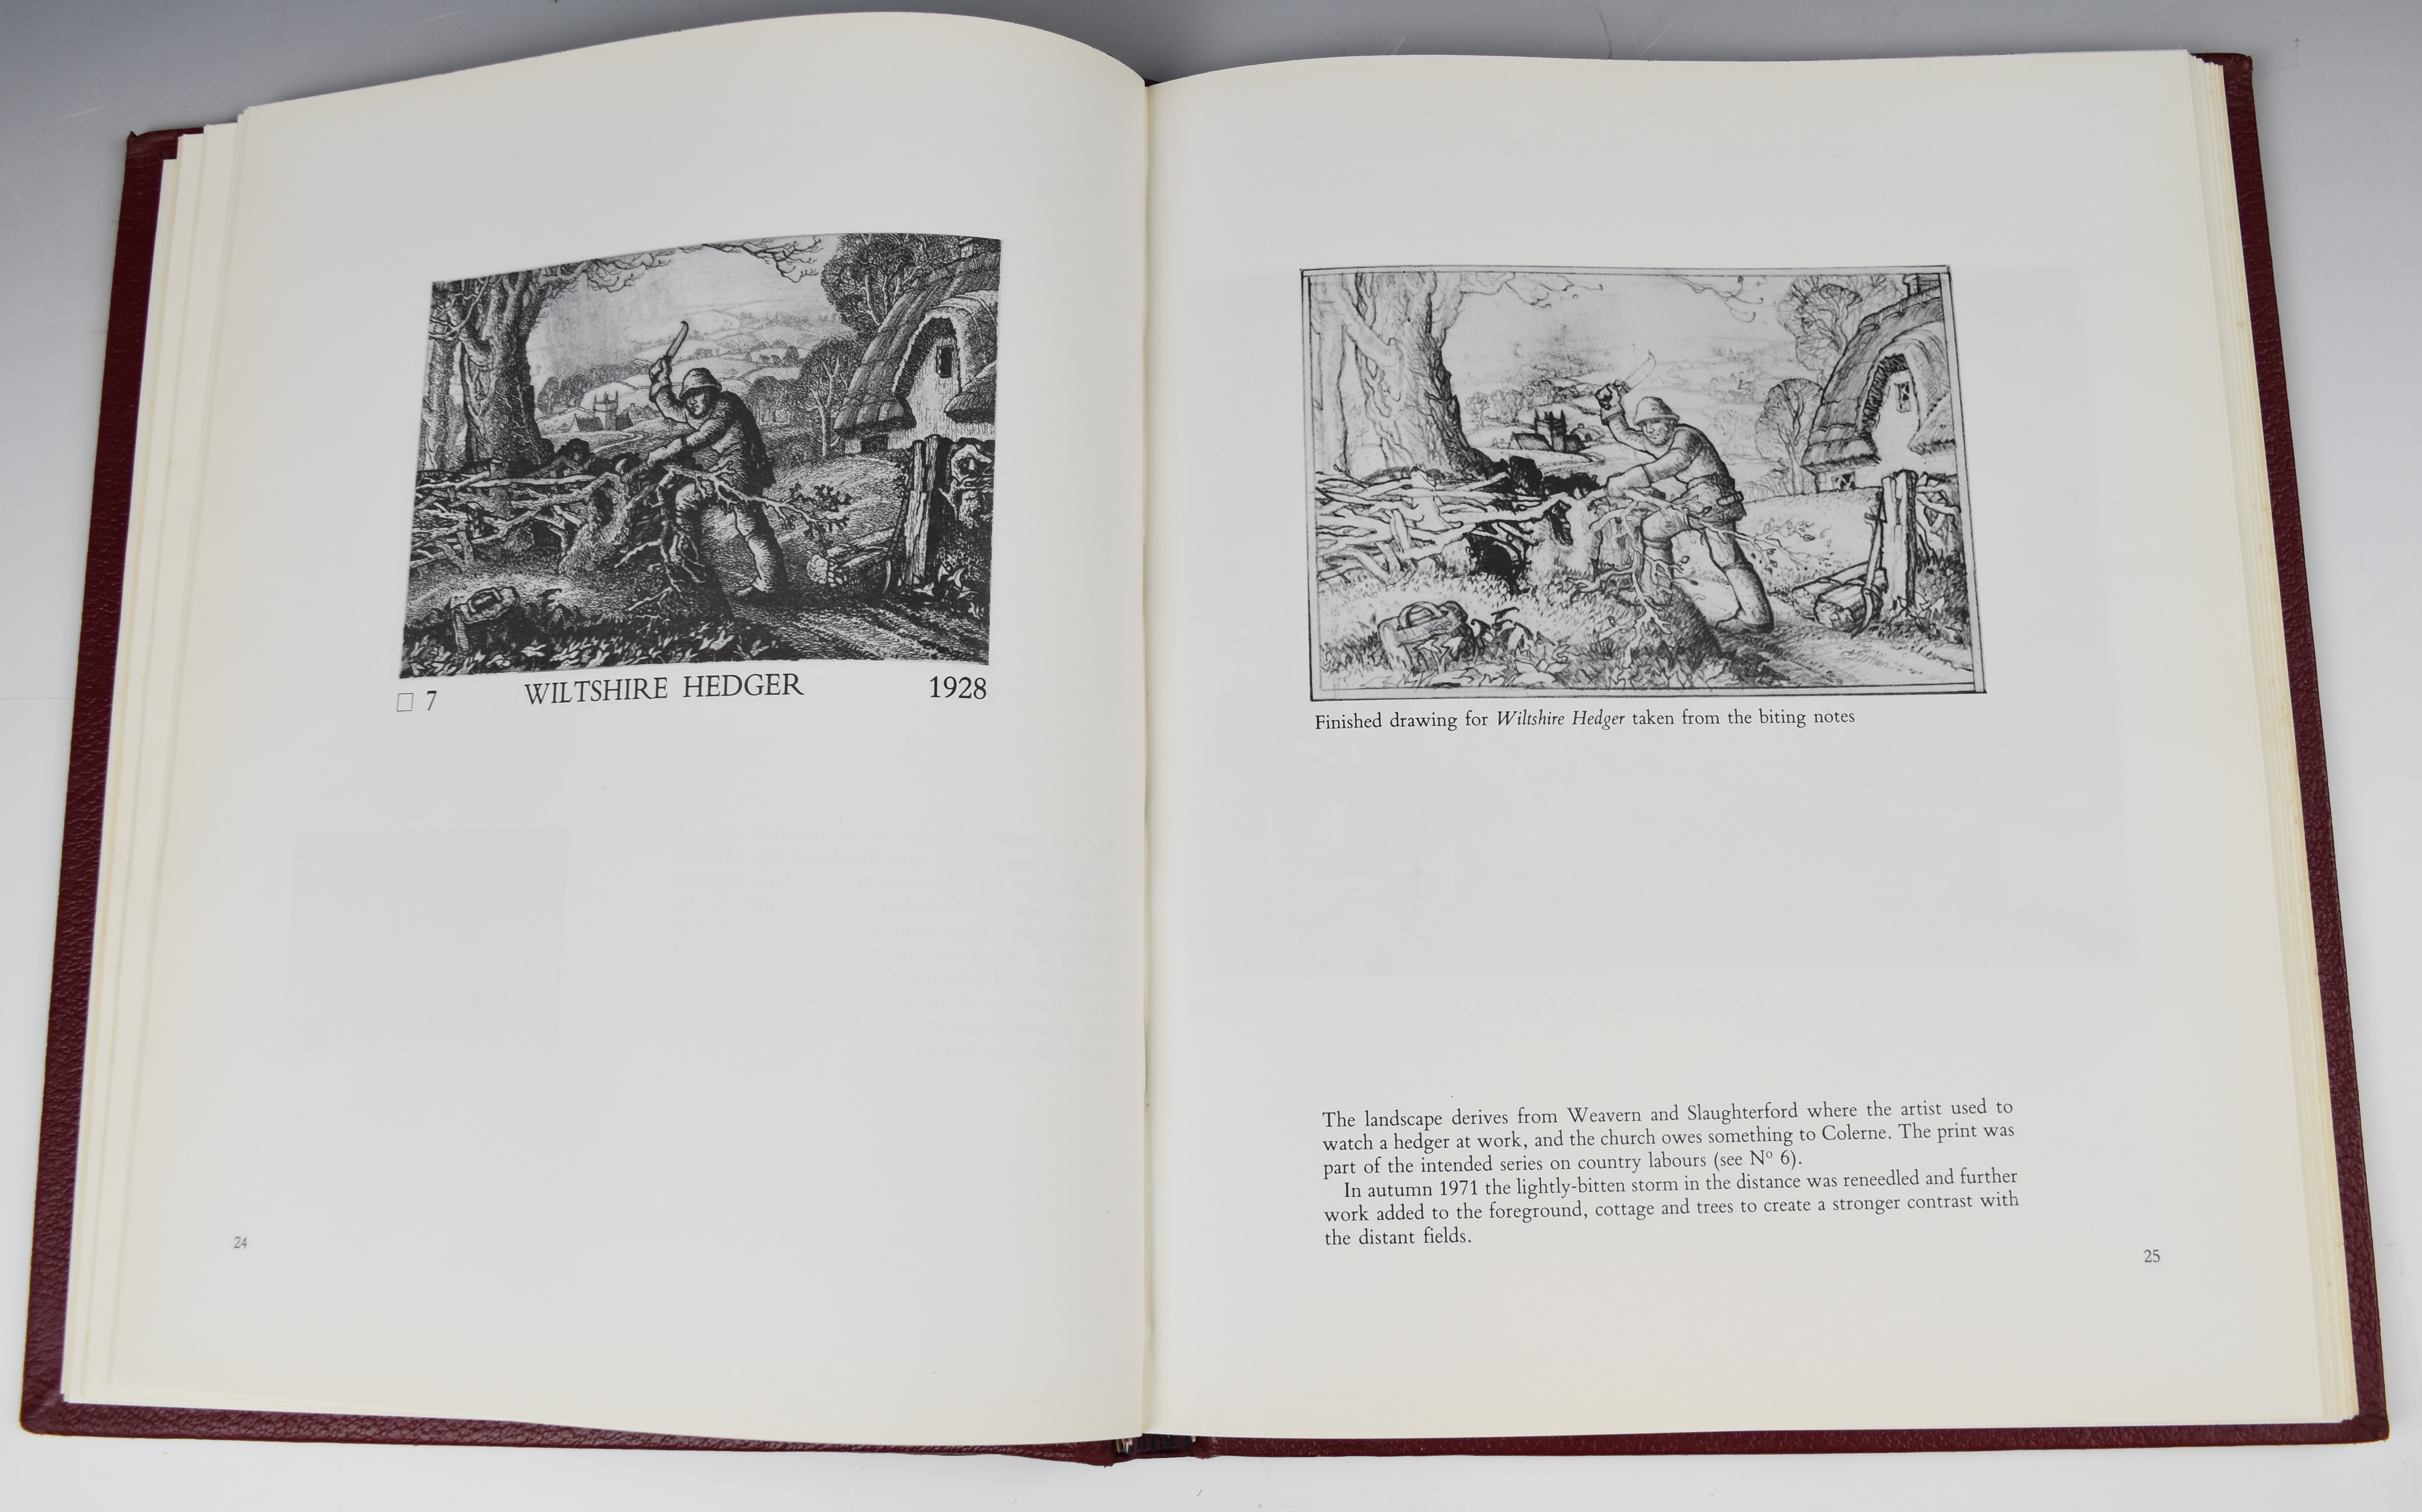 Robin Tanner, The Etchings, published Garton & Co 1988, first edition limited to 1000 copies, this - Image 4 of 8